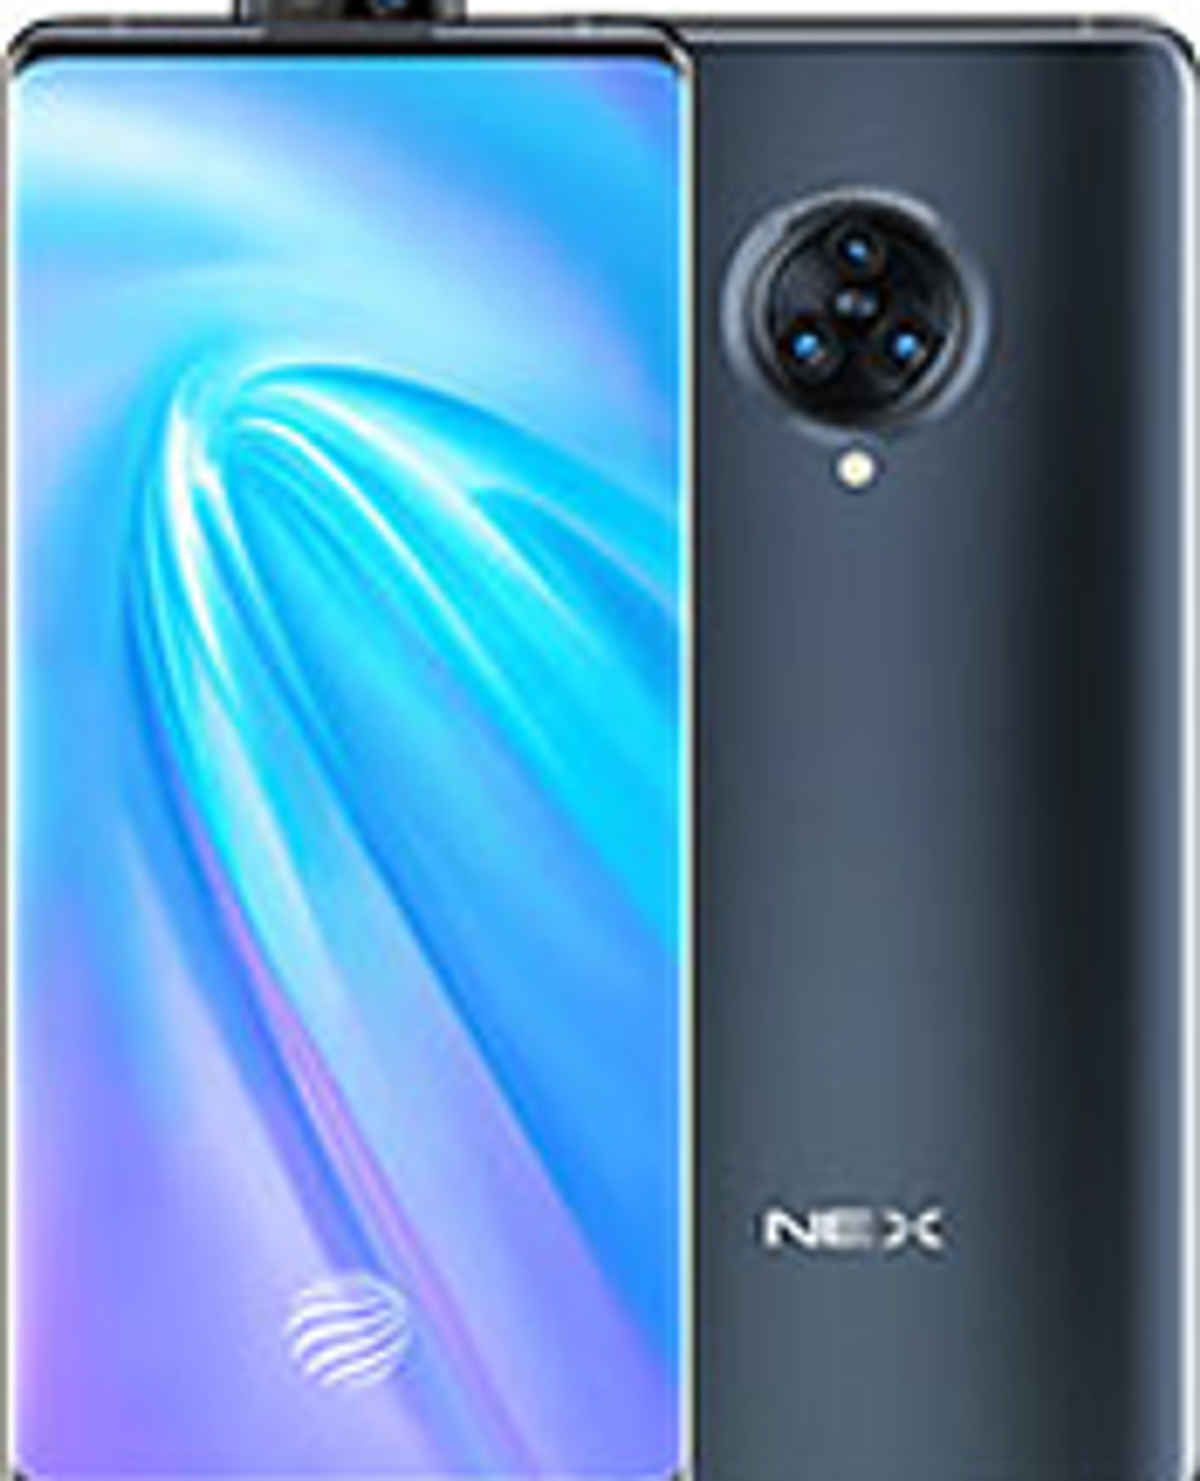 Vivo Nex 3 5g Expected Specs Release Date In India As On 31st